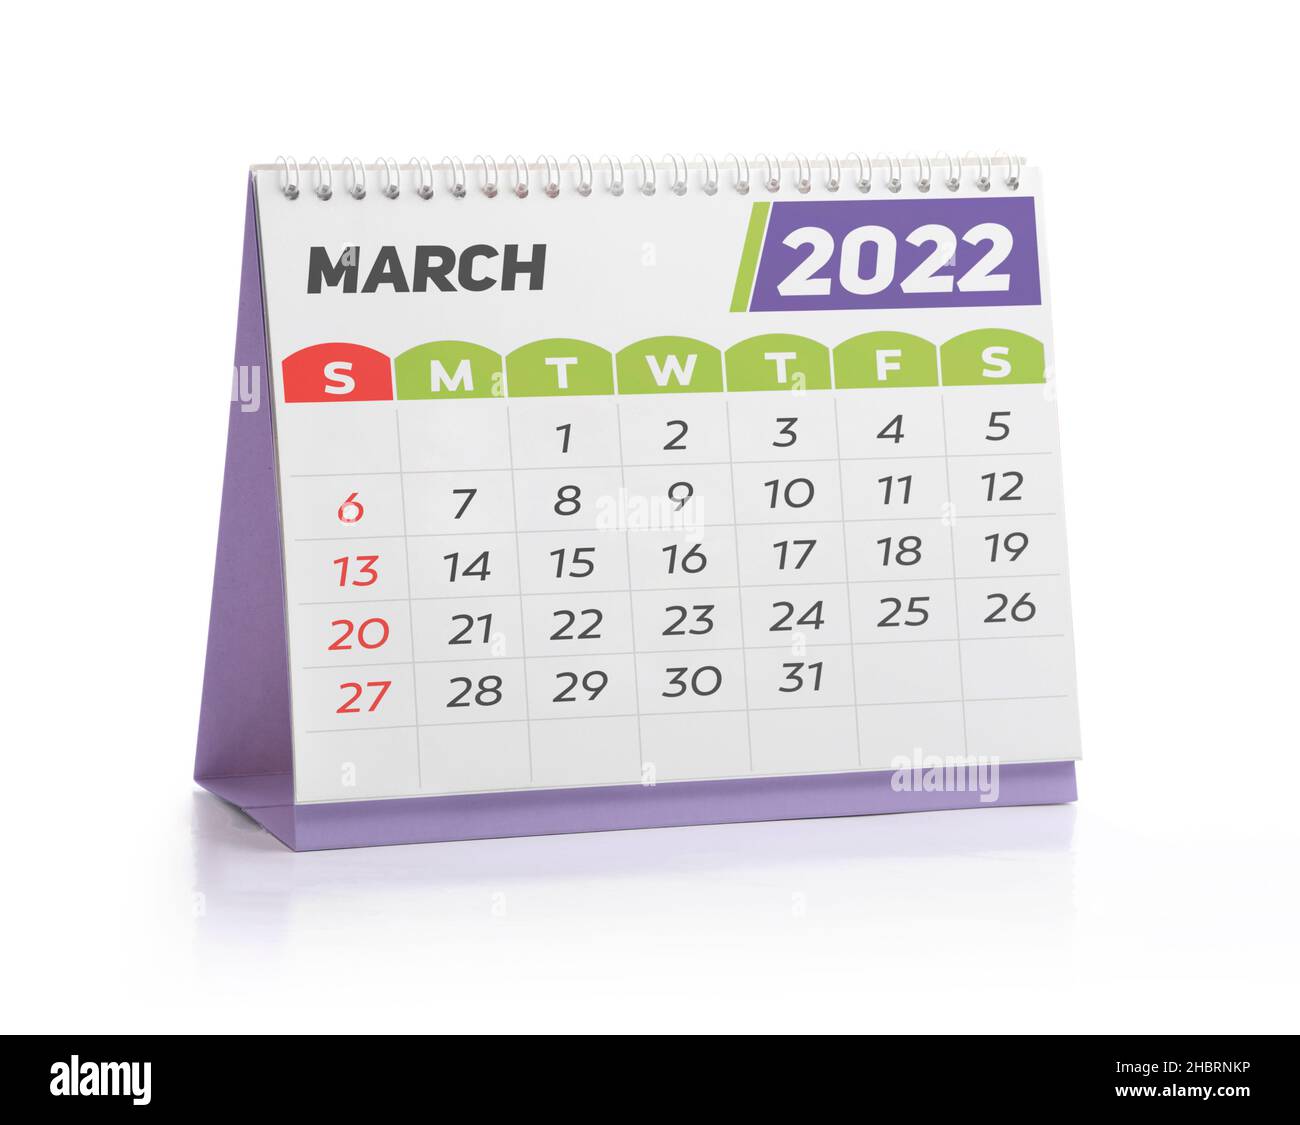 March White Office Calendar 2022 Isolated on White Stock Photo